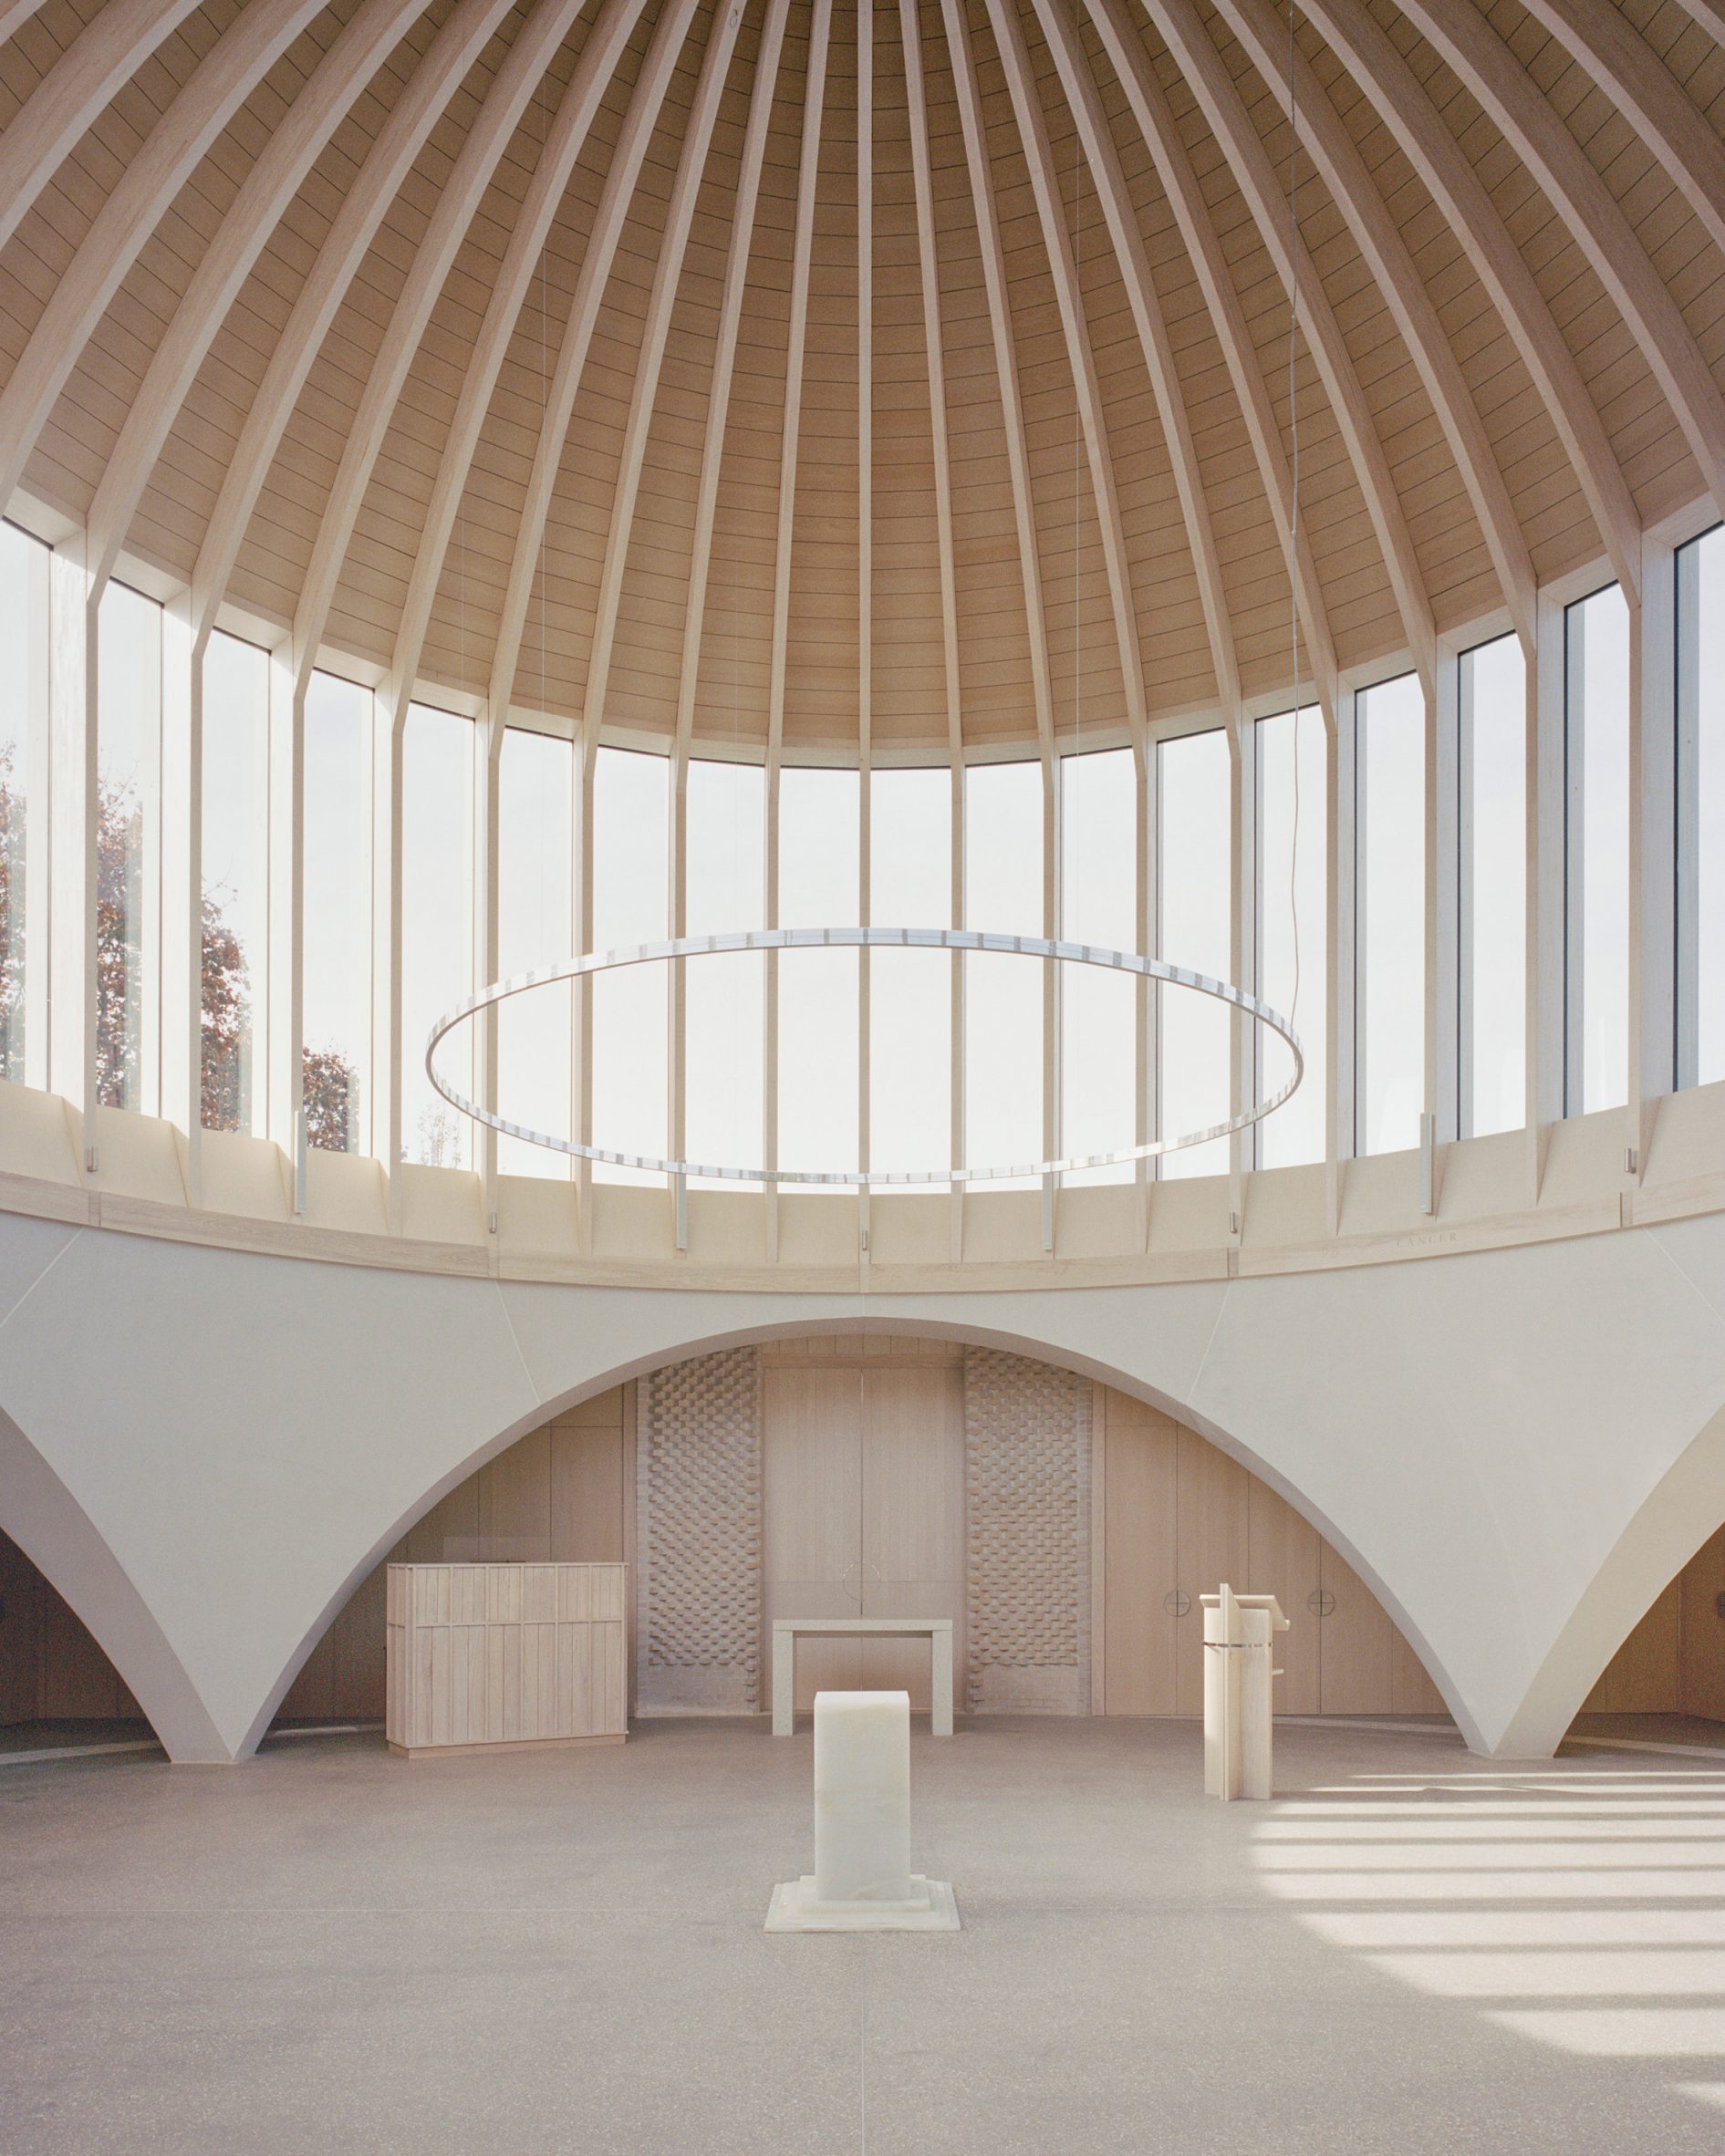 Temple interior by James Gorst Architects